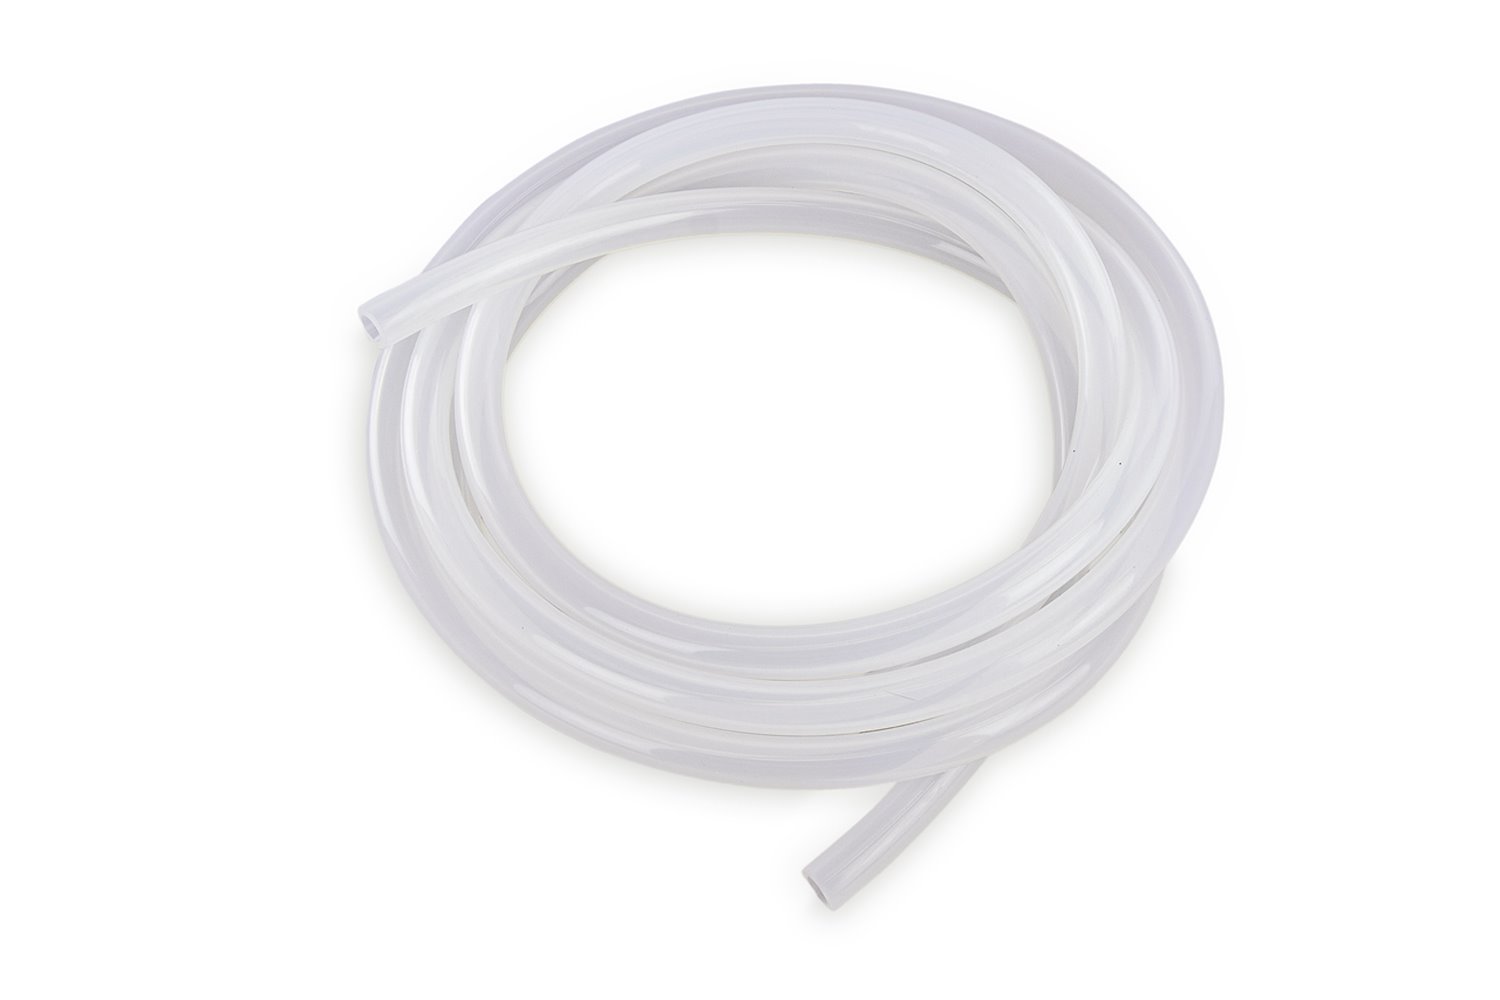 HTSVH3TW-CLEARx5 High-Temperature Silicone Vacuum Hose Tubing, 1/8 in. ID, 5 ft. Roll, Clear